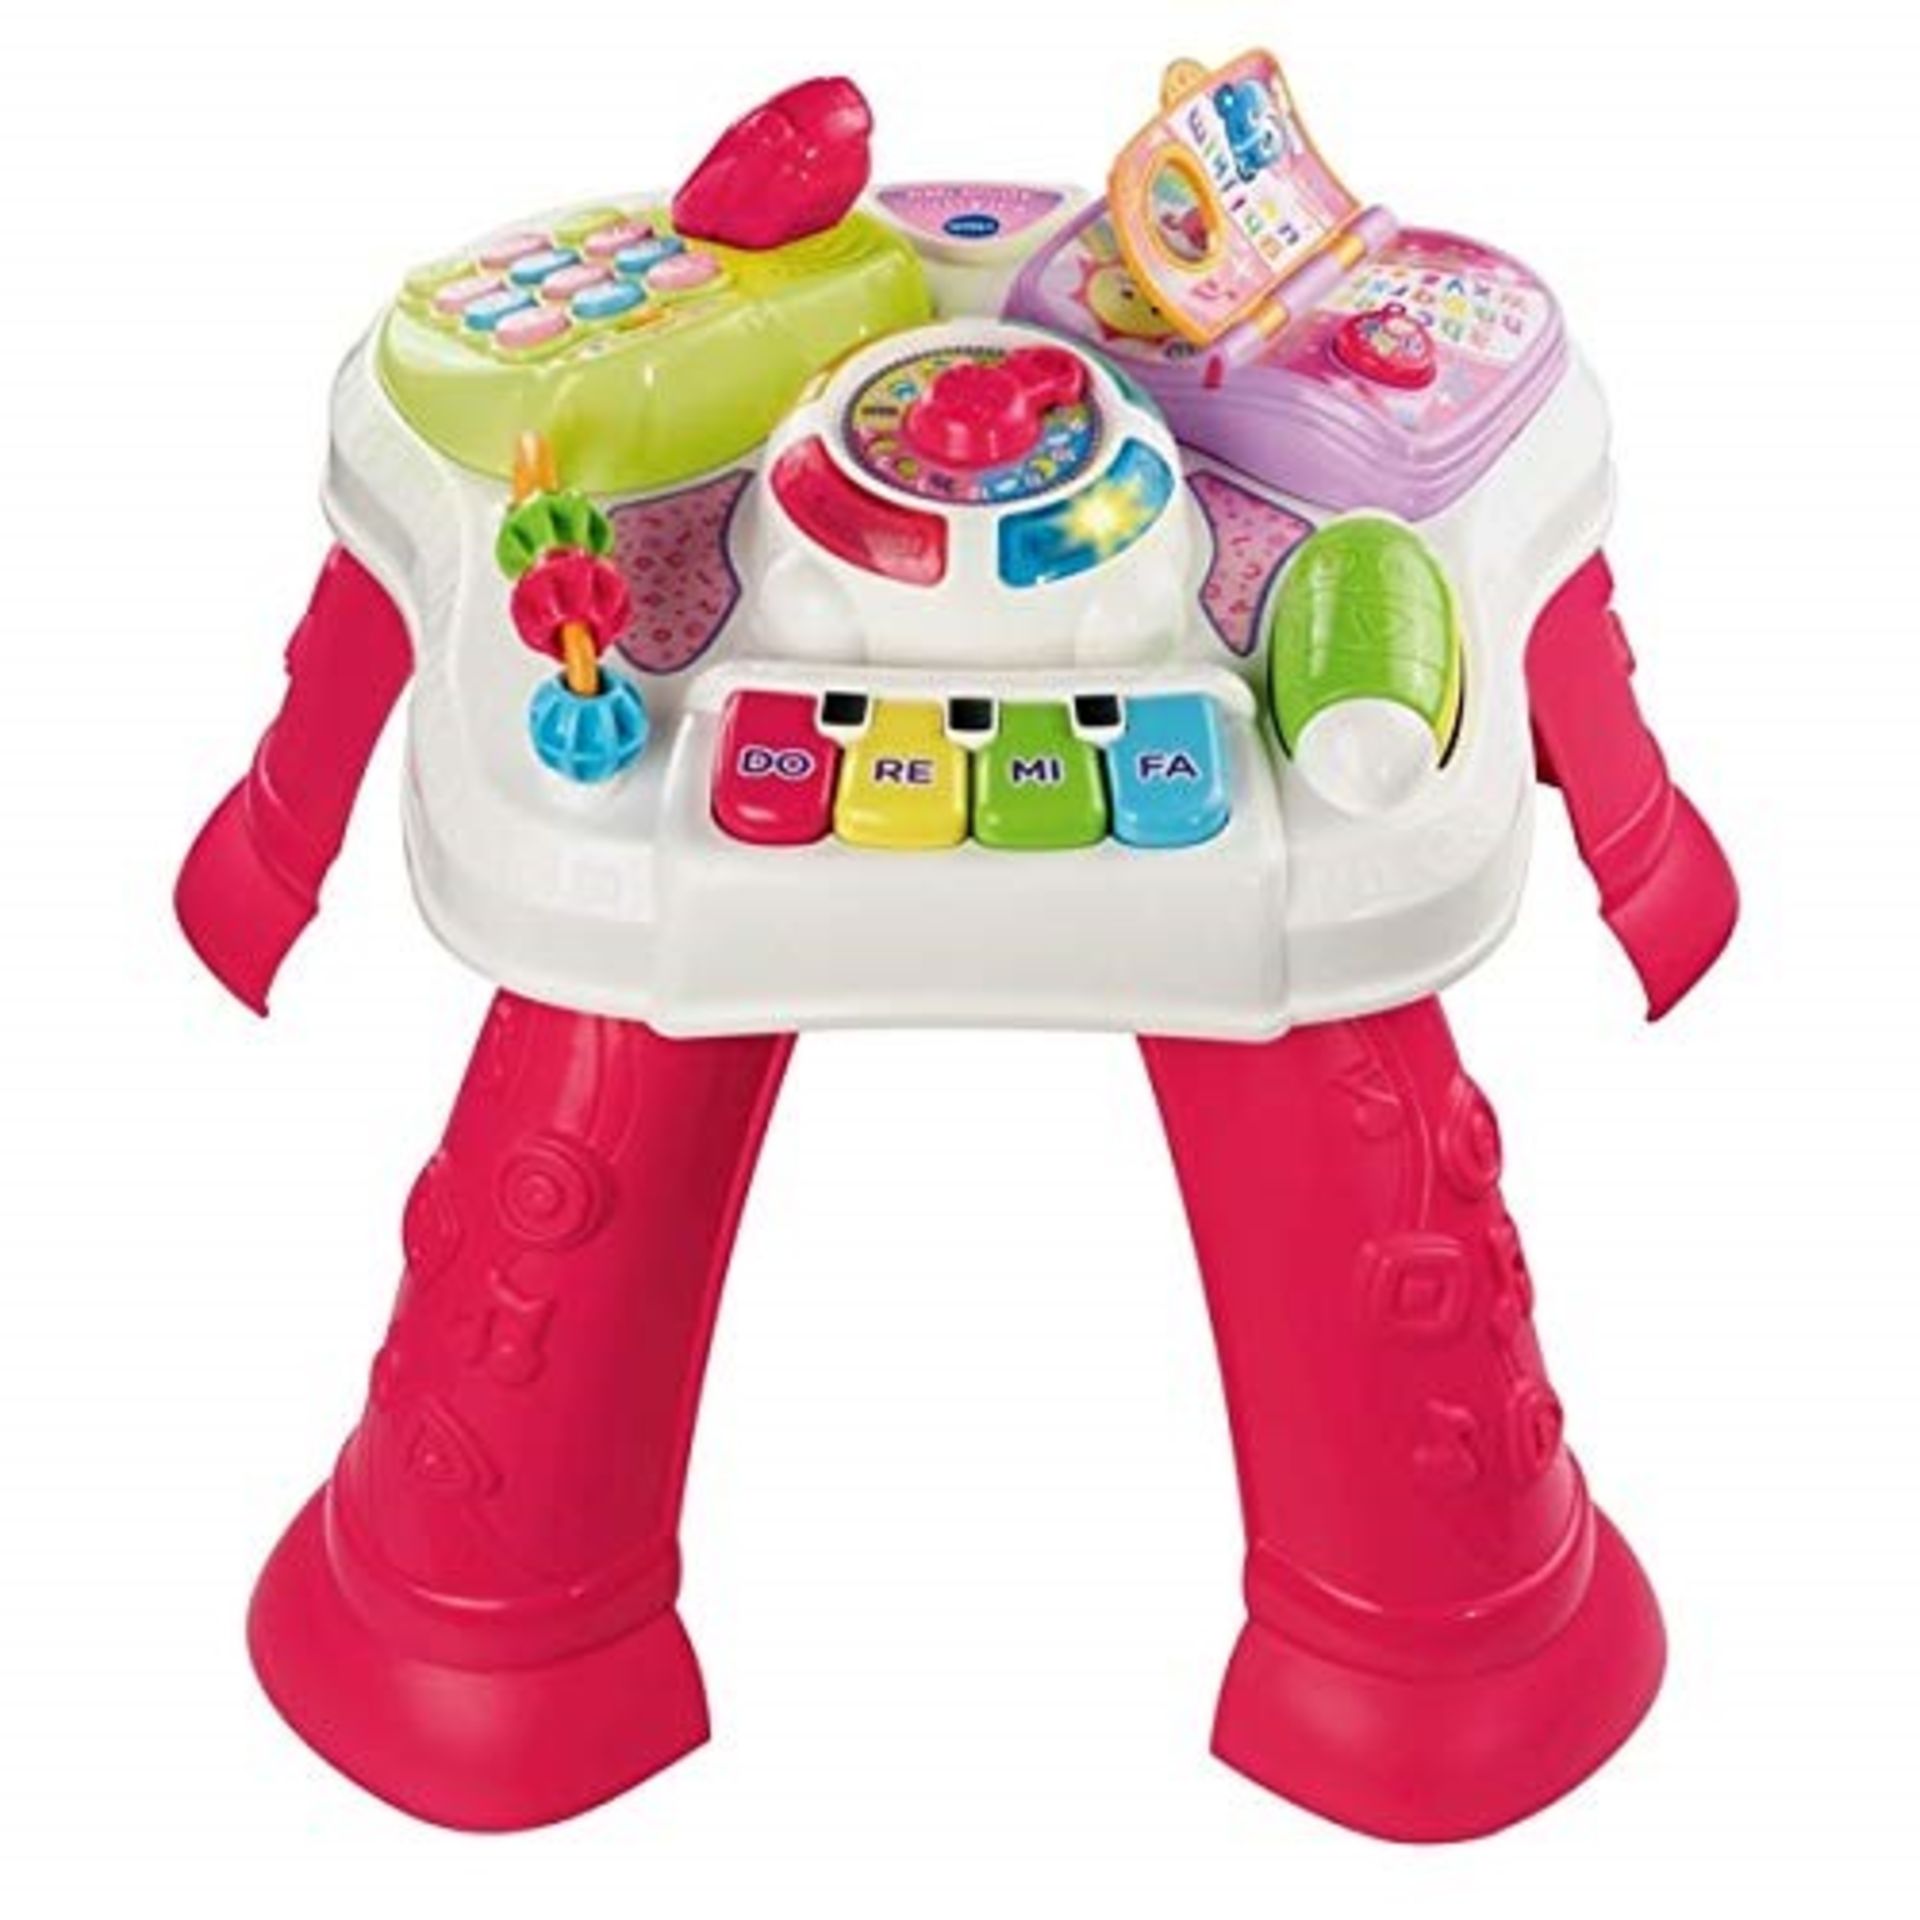 Vtech- 2-in-1 Talking Table, SPB, Pink (80-148087), Assorted Colour/Model